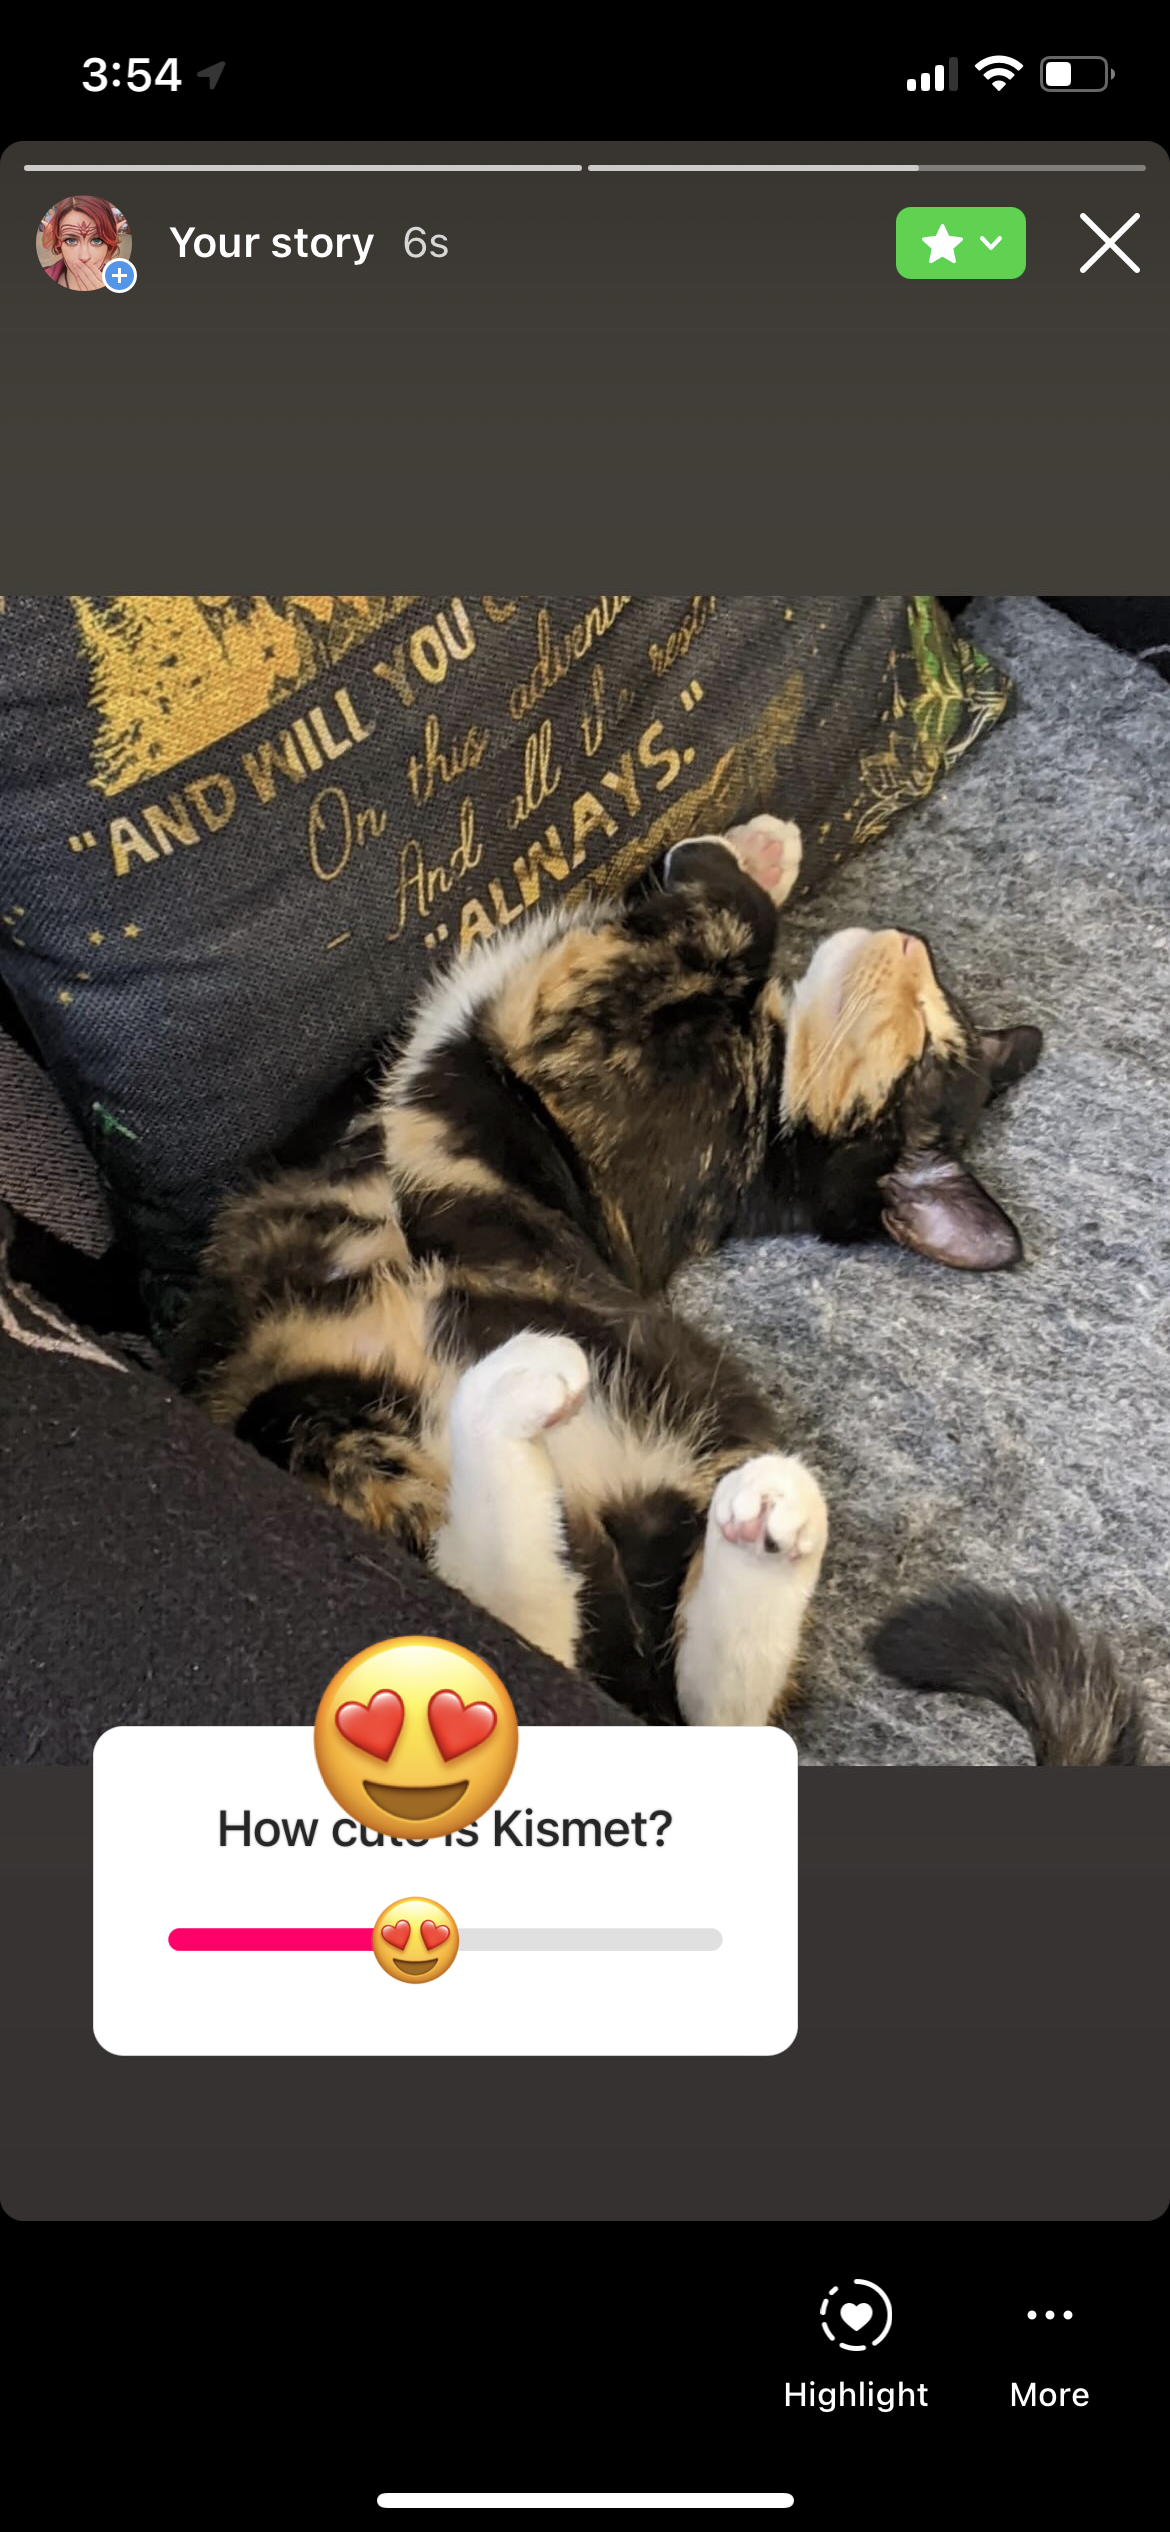 A screengrab of the mobile view of Instagrams Stories, showing a calico kitten sleeping in a silly position, belly up, on a chair. There is an overlay of a slider box with the label How cute is Kismet?. The selection thumb is the heart eyes emoji.